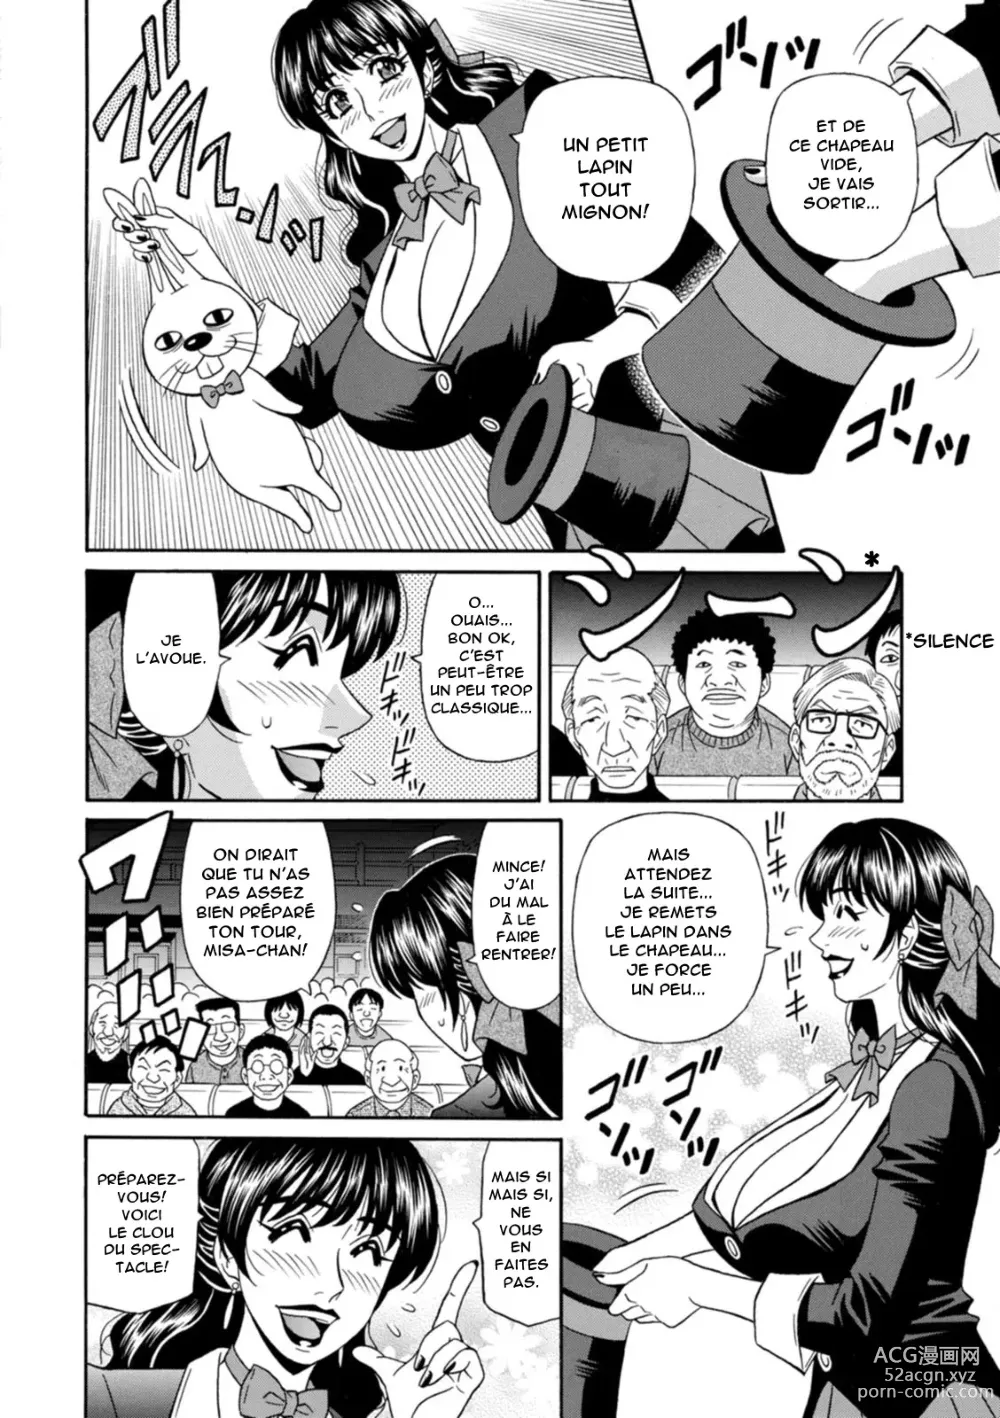 Page 8 of manga Magician to H na Deshi - The magician and her lewd apprentice Ch.1-2